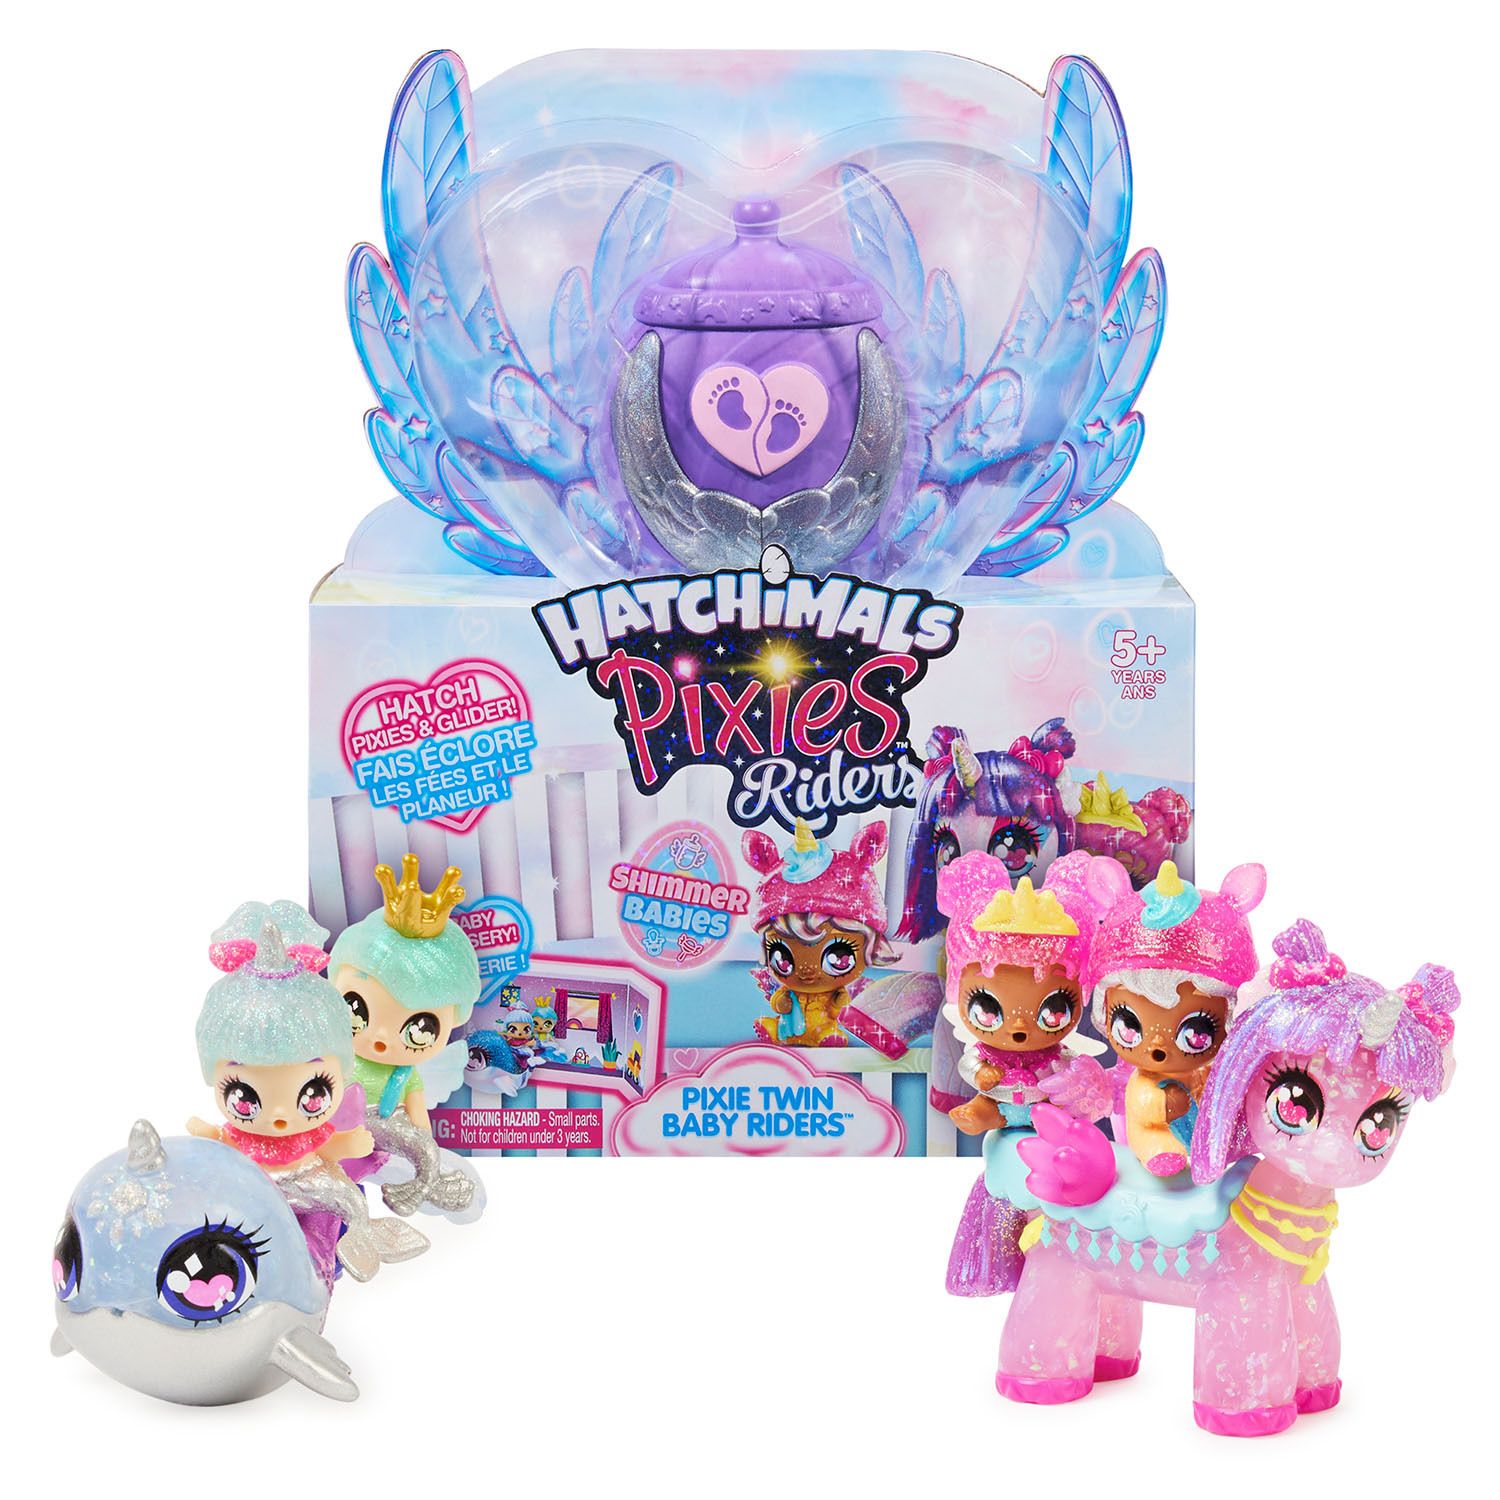 Image for Hatchimals Pixies Riders Shimmer Babies Pixie Baby Twins with Glider and 4 Accessories at Kohl's.